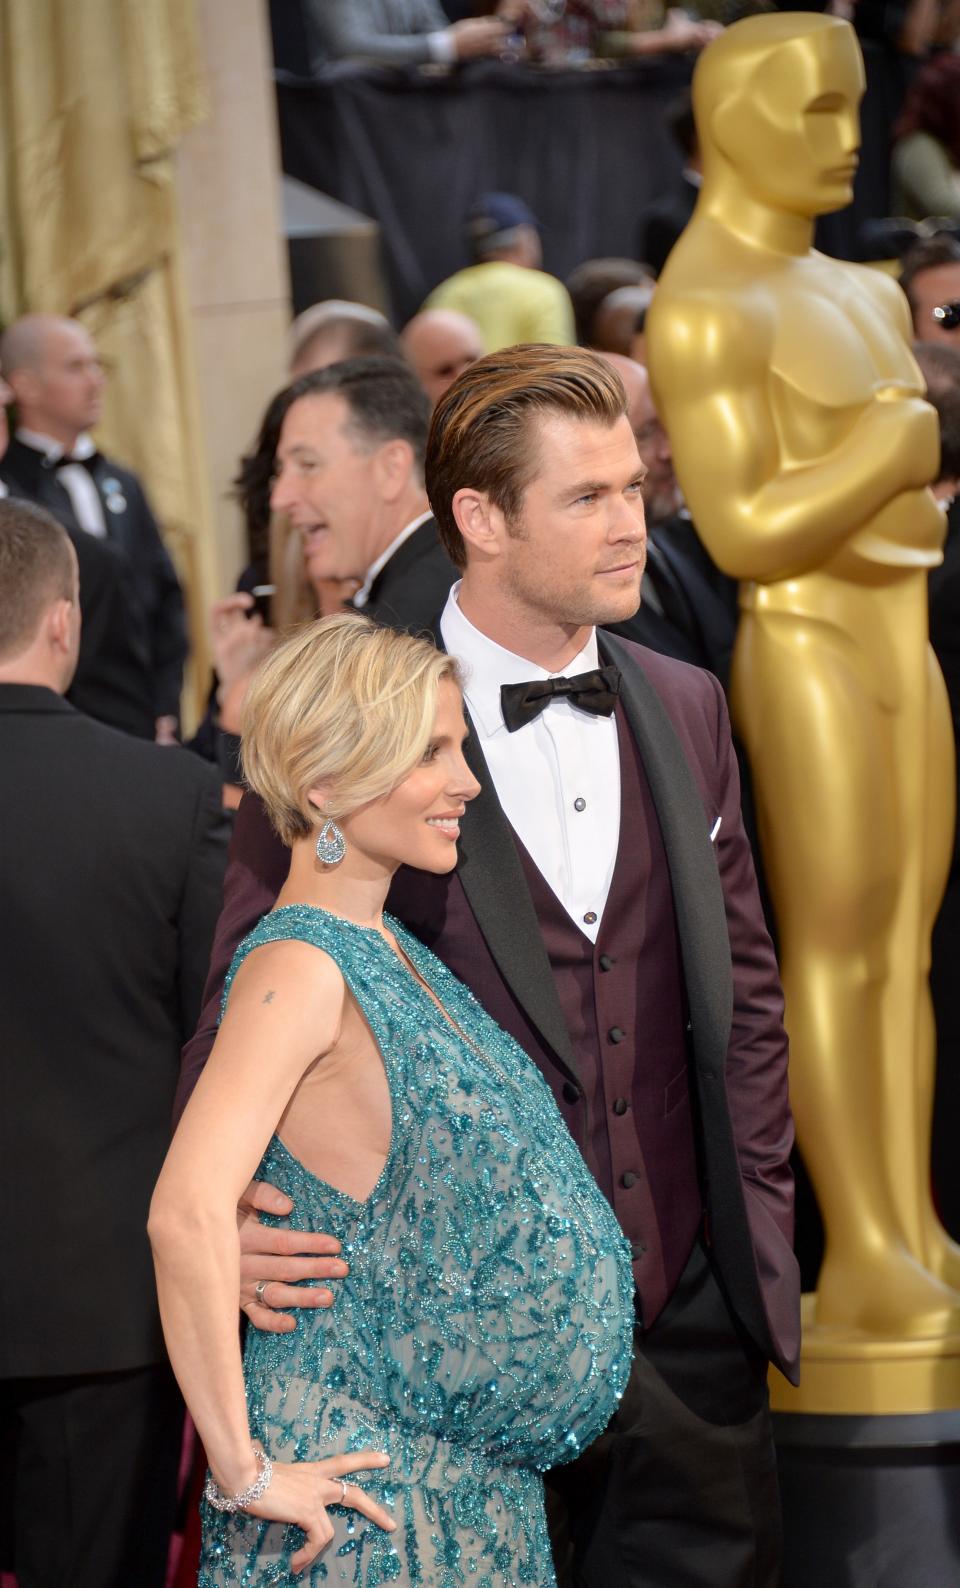 Pataky and Hemsworth arrive at the 86th Academy Awards in 2014.